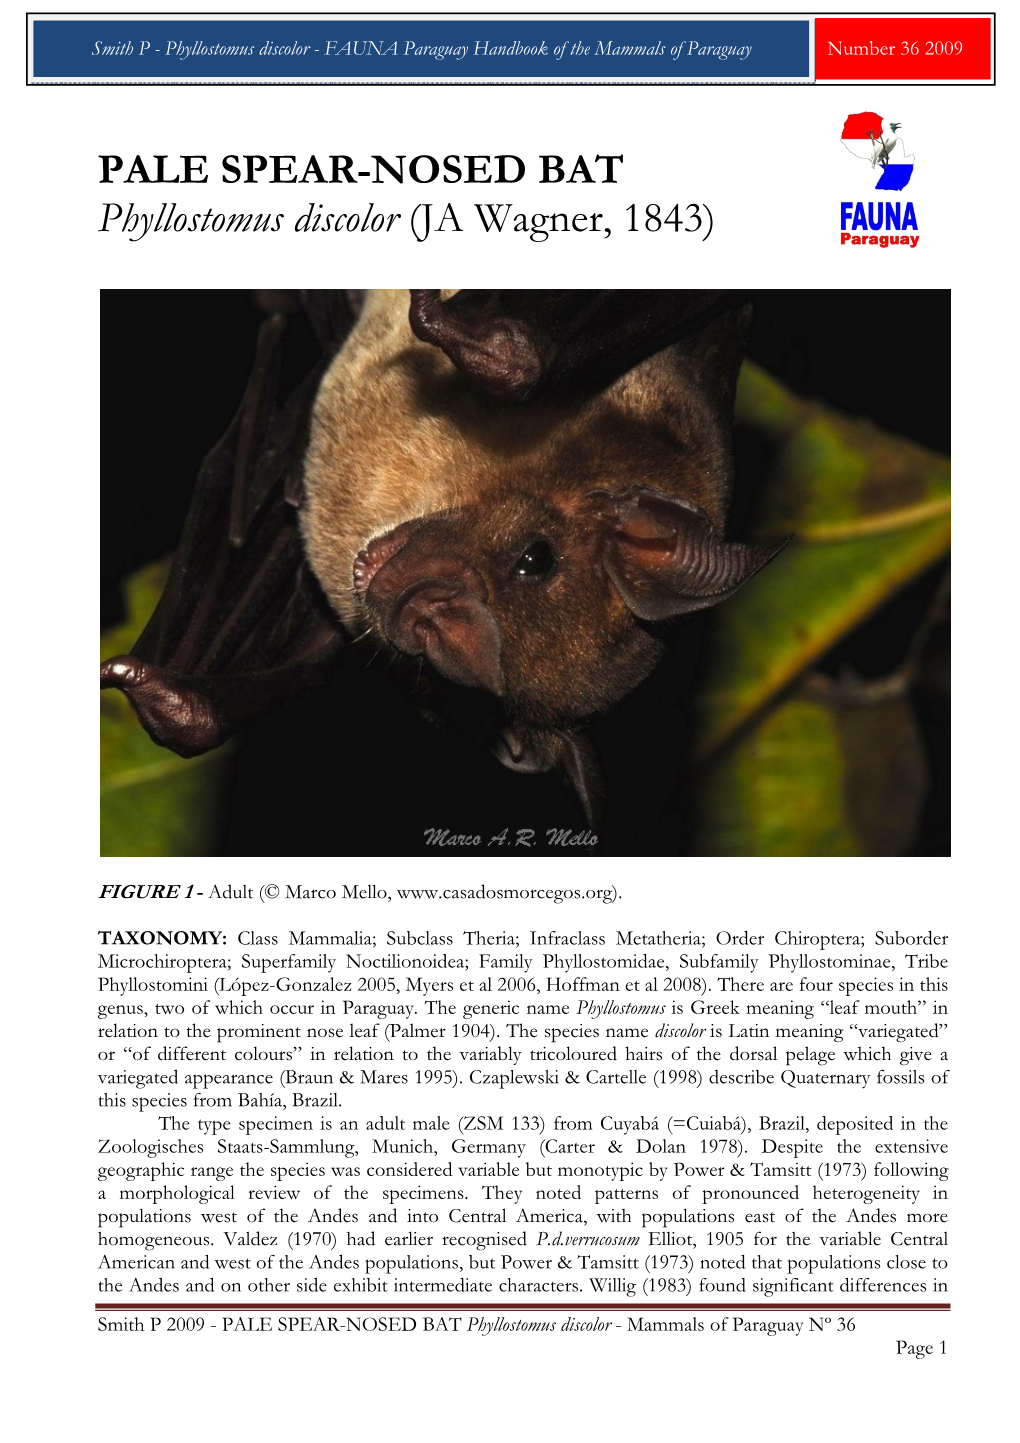 PALE SPEAR-NOSED BAT Phyllostomus Discolor (JA Wagner, 1843)